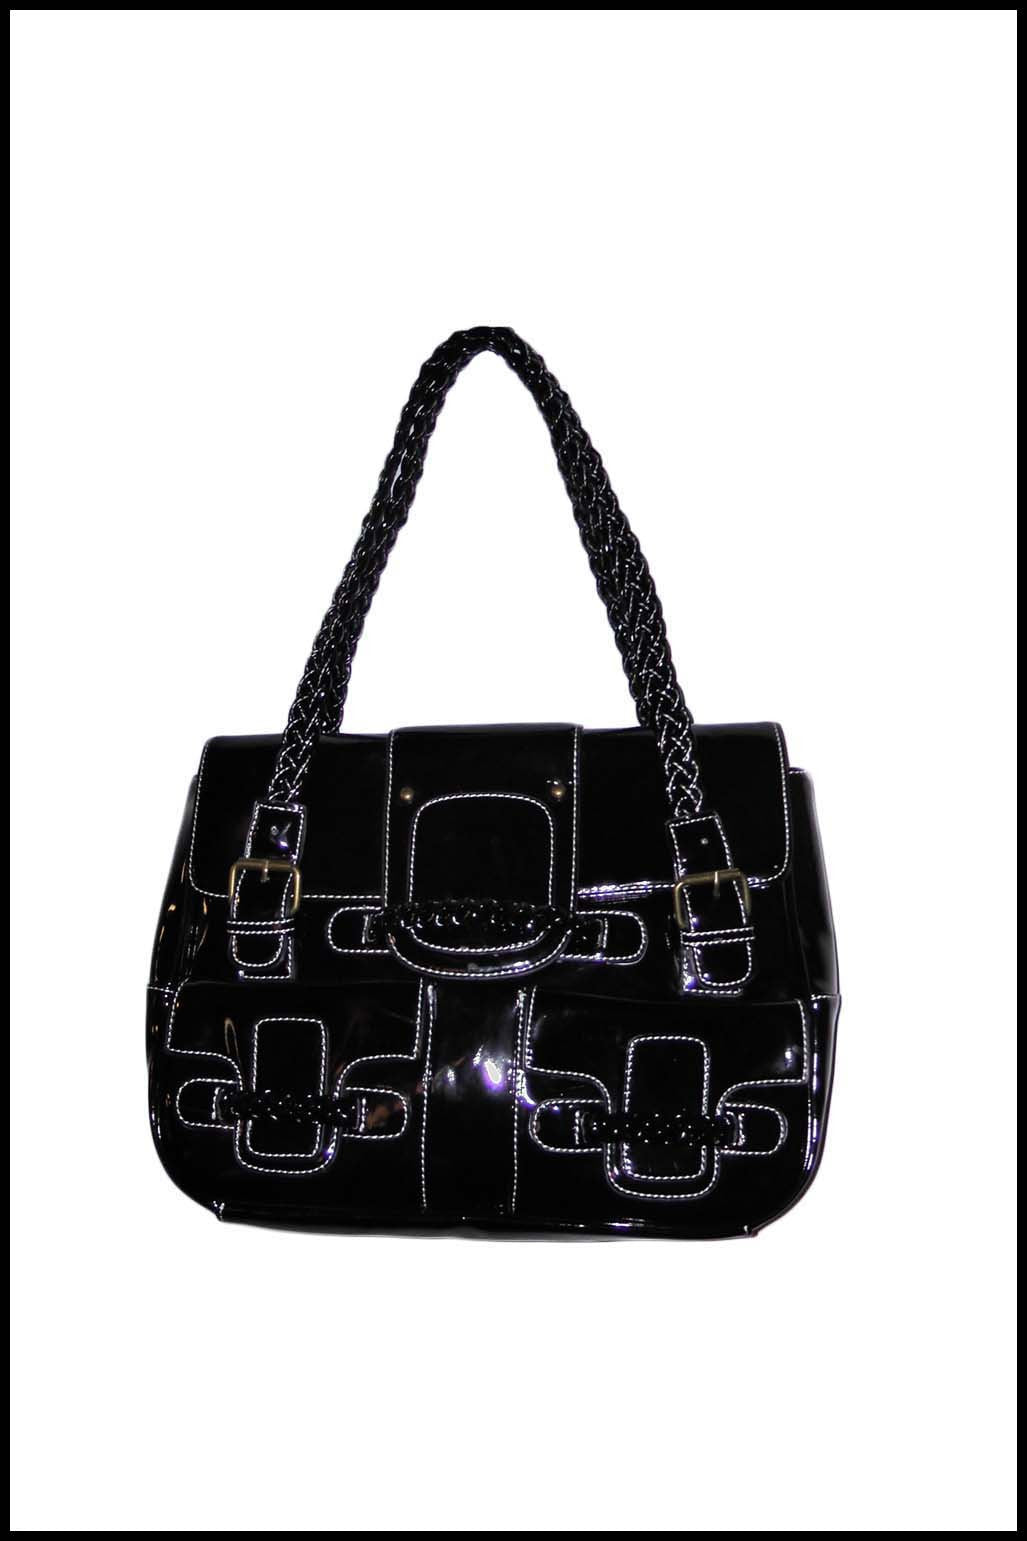 Patent Handbag with White Stitch Detailing and Large Front Pockets